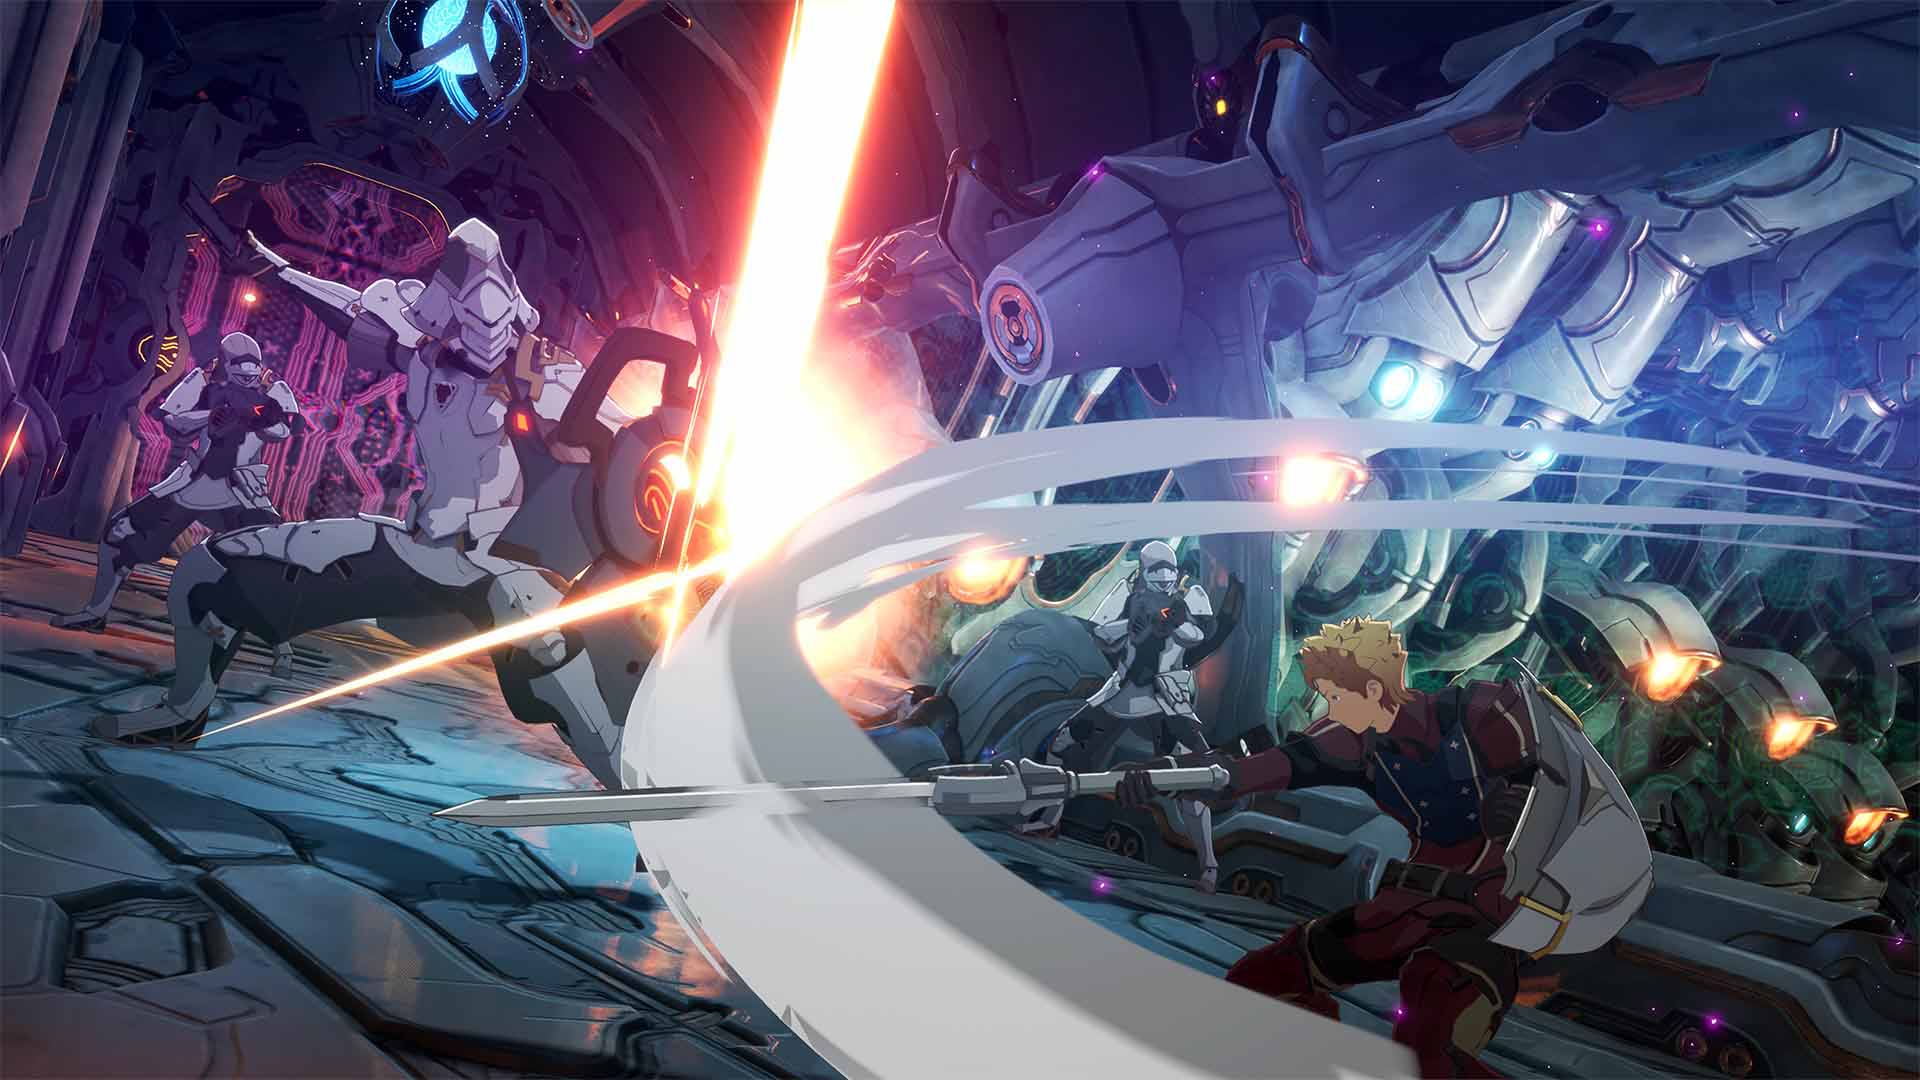 Blue Protocol Unveils Fight for the Future English Trailer